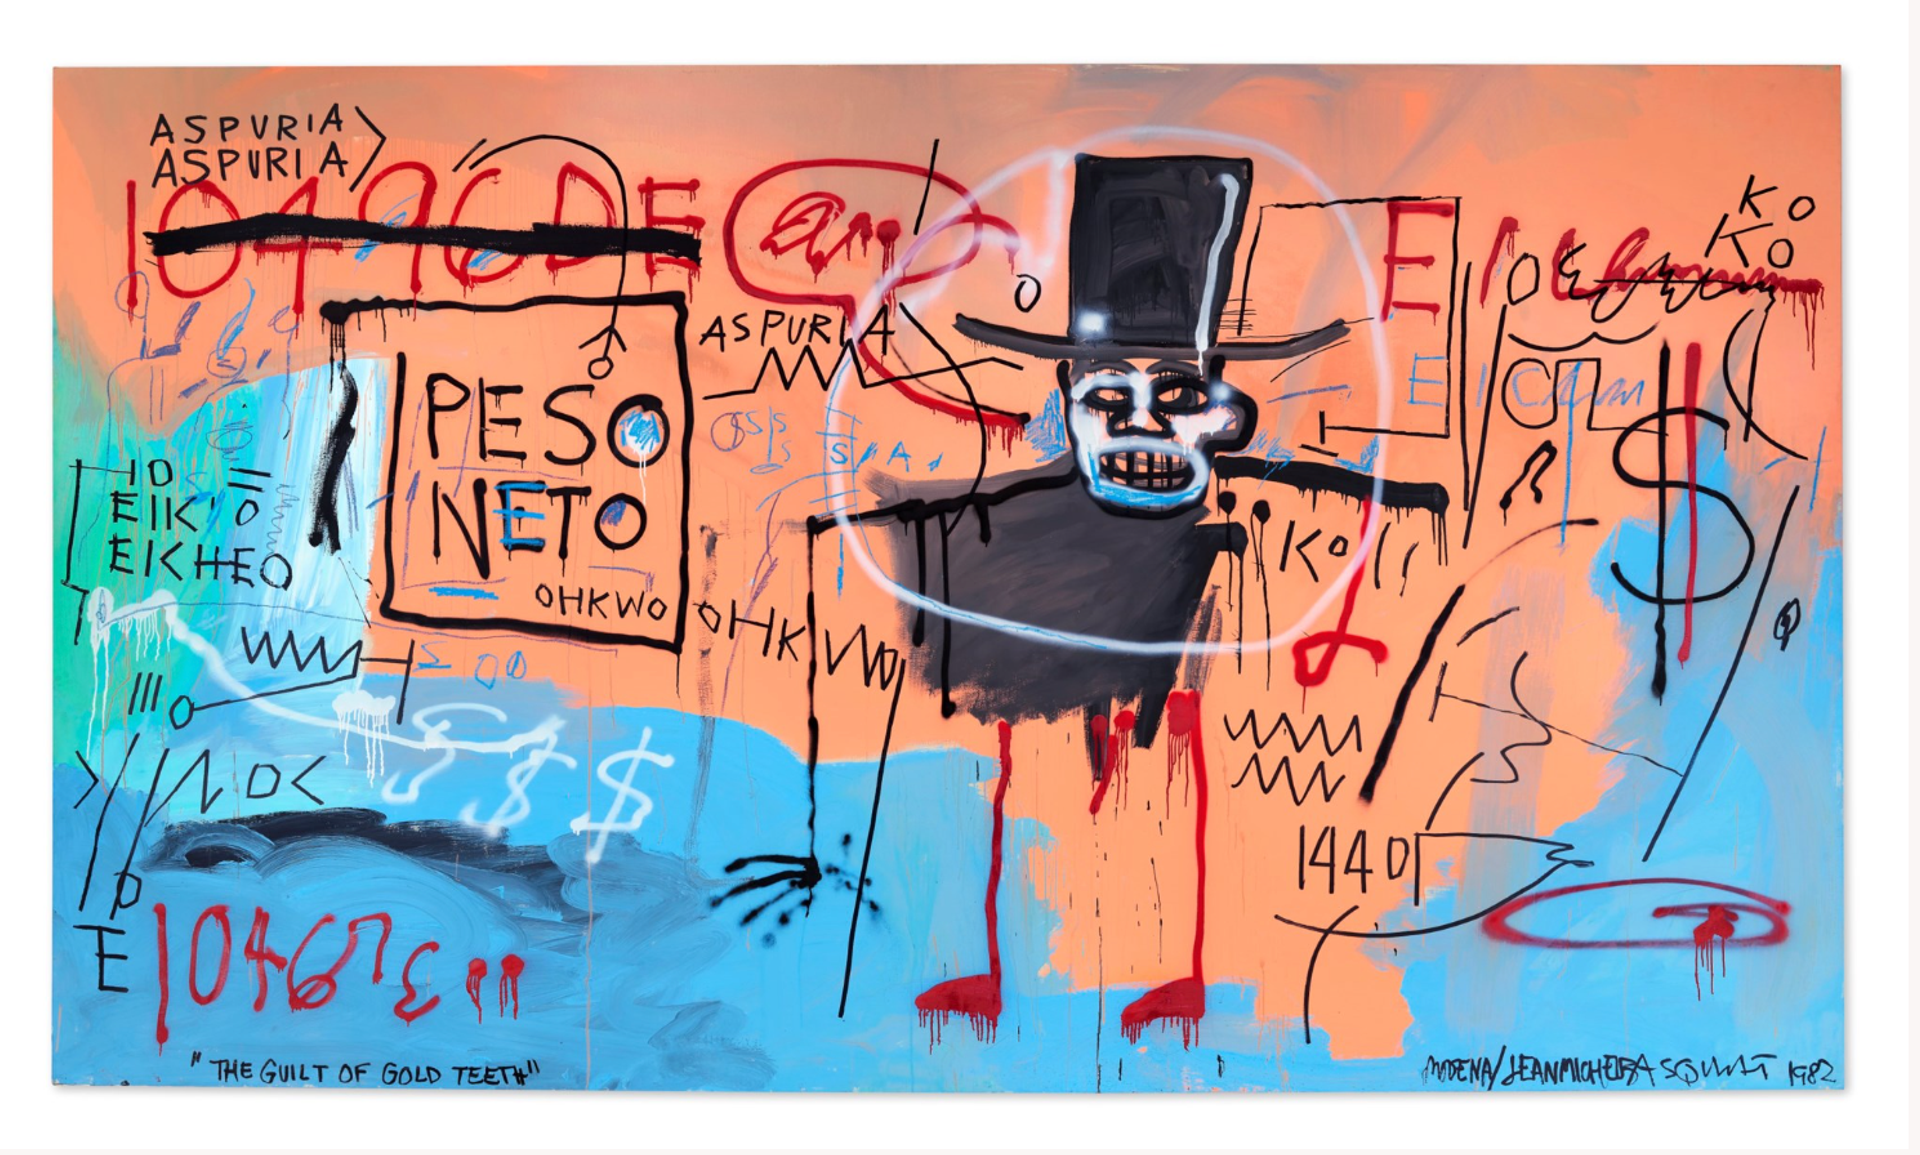 The Guilt of Gold Teeth by Basquiat